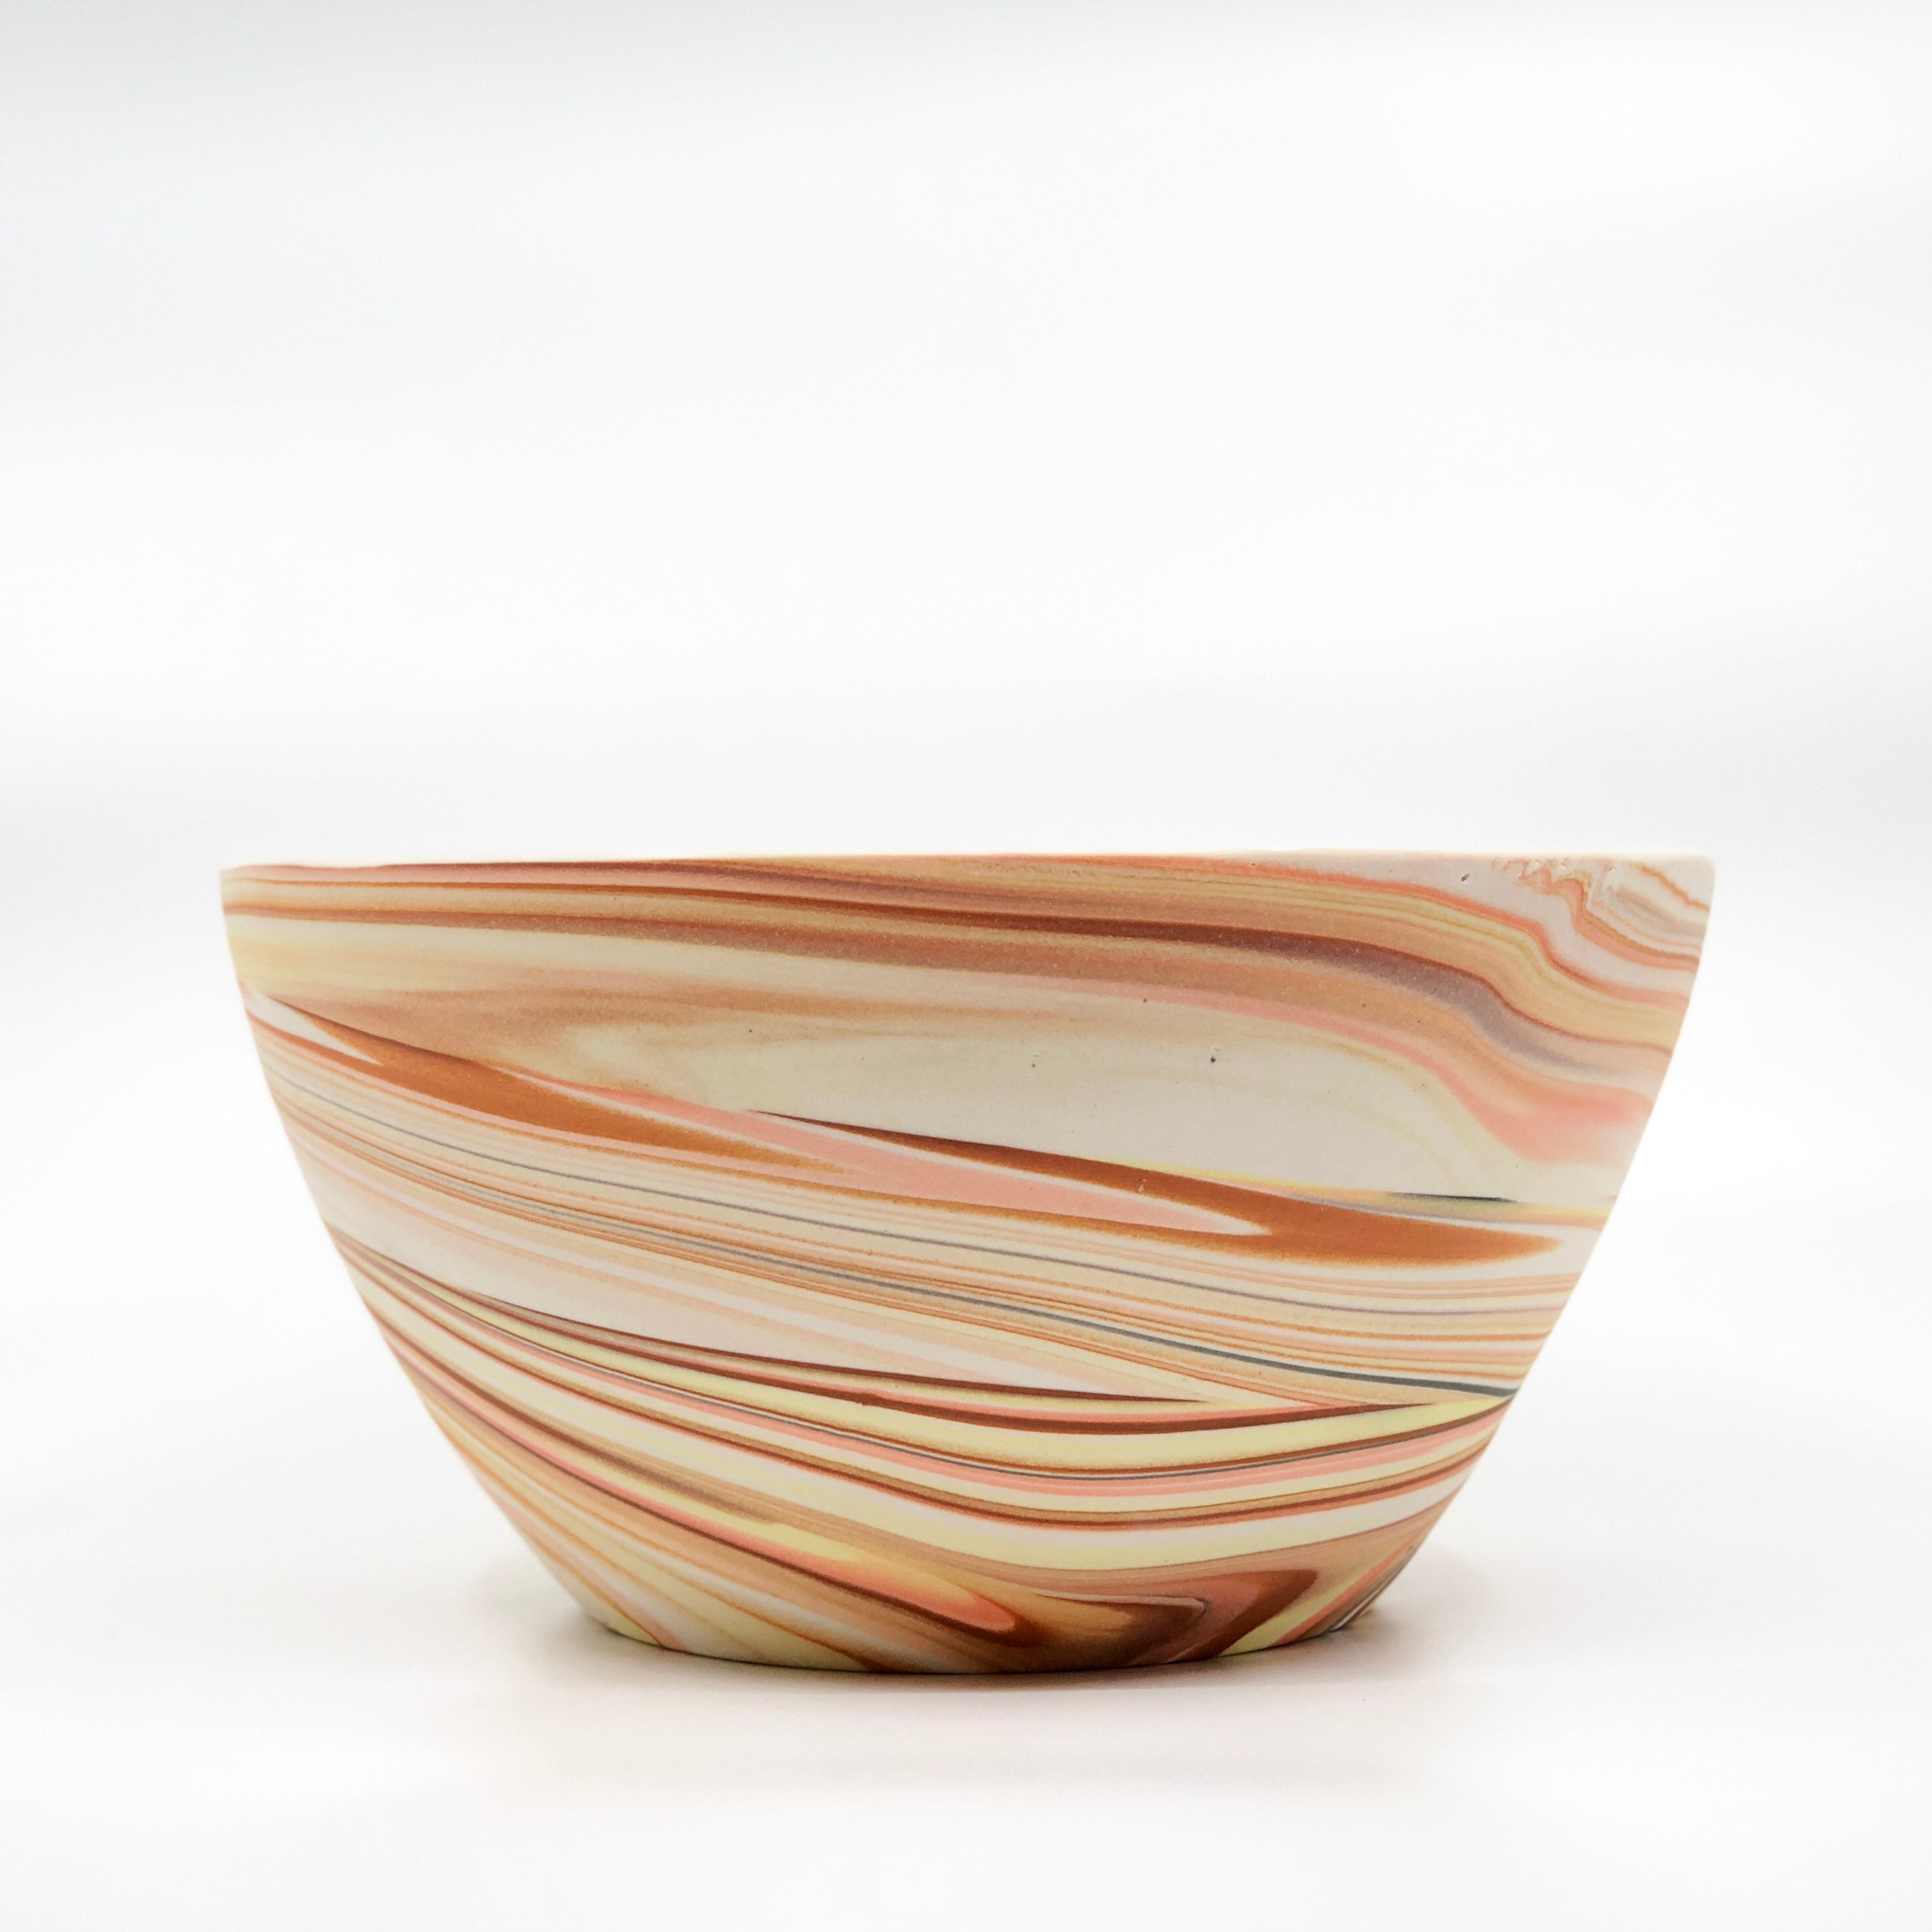 DO NOT SHIP *Strata Serving Bowl (ship in 4-6 weeks)